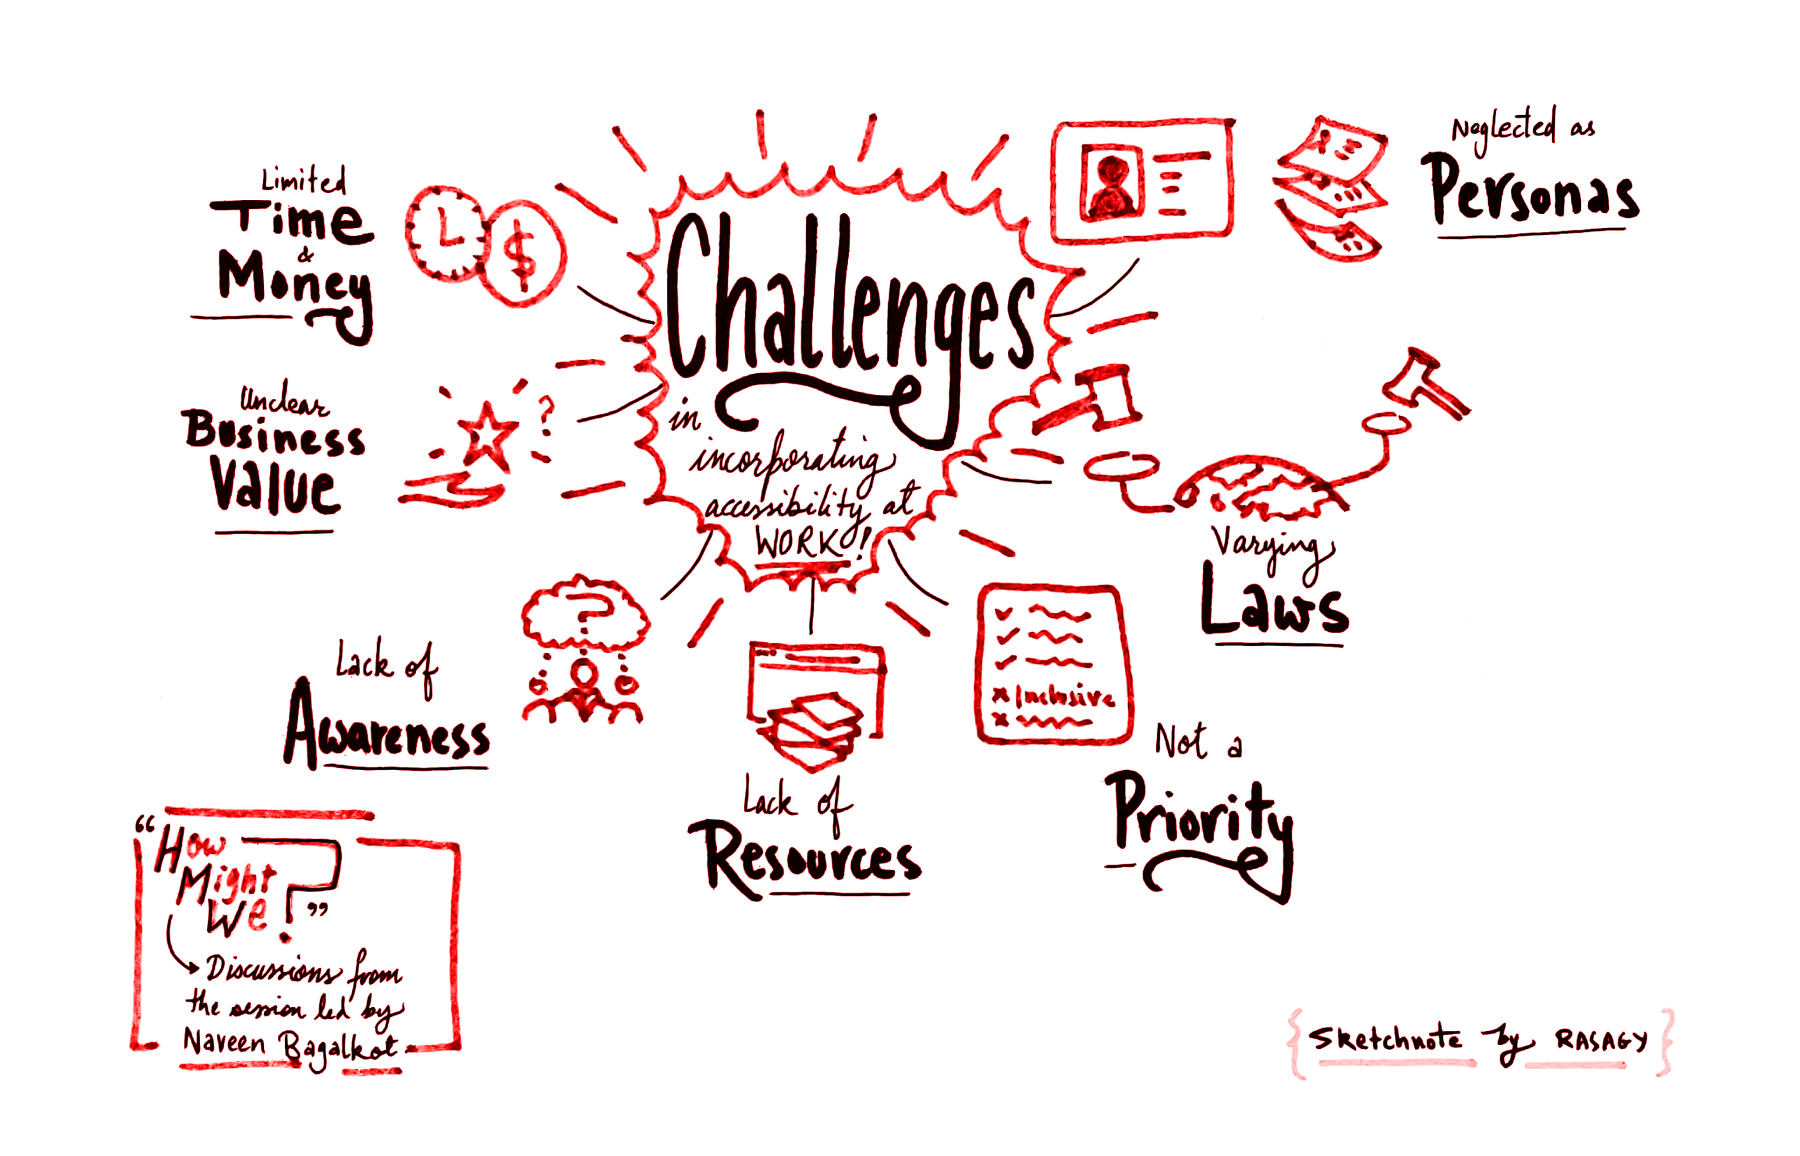 Sketchnote of key challenges in improving digital accessibility.